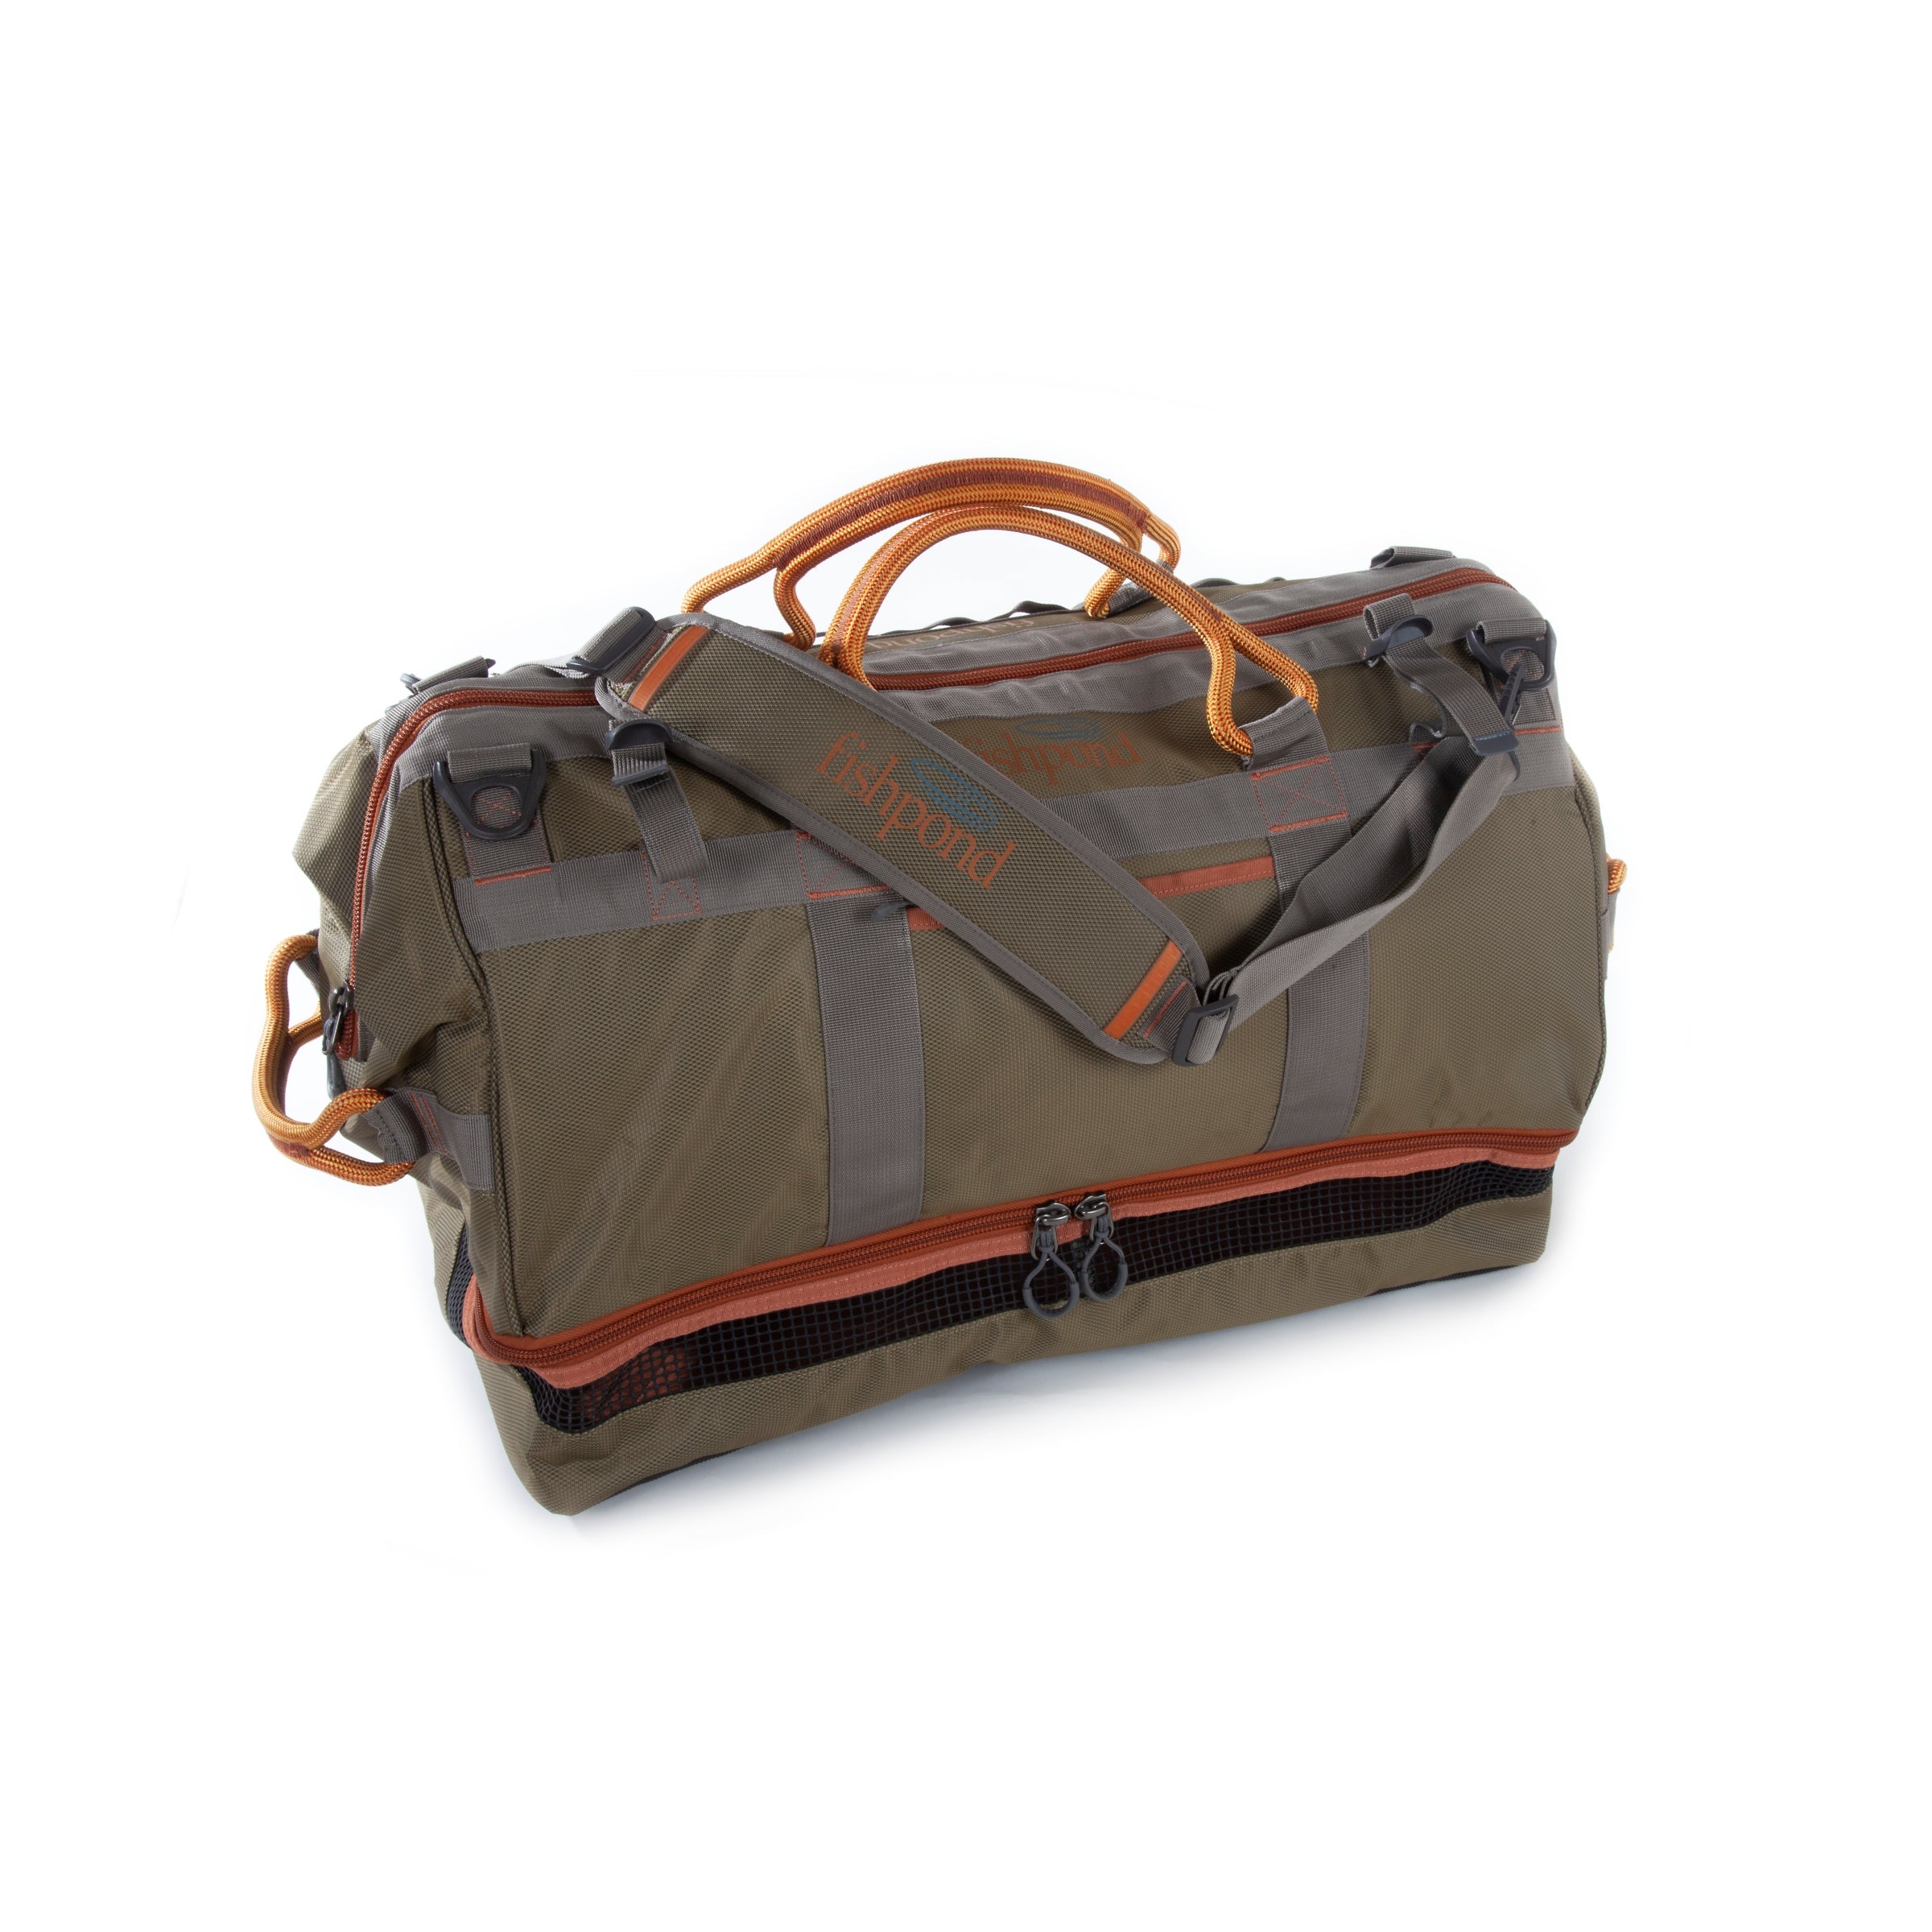 Gear Bags – Tailwaters Fly Fishing